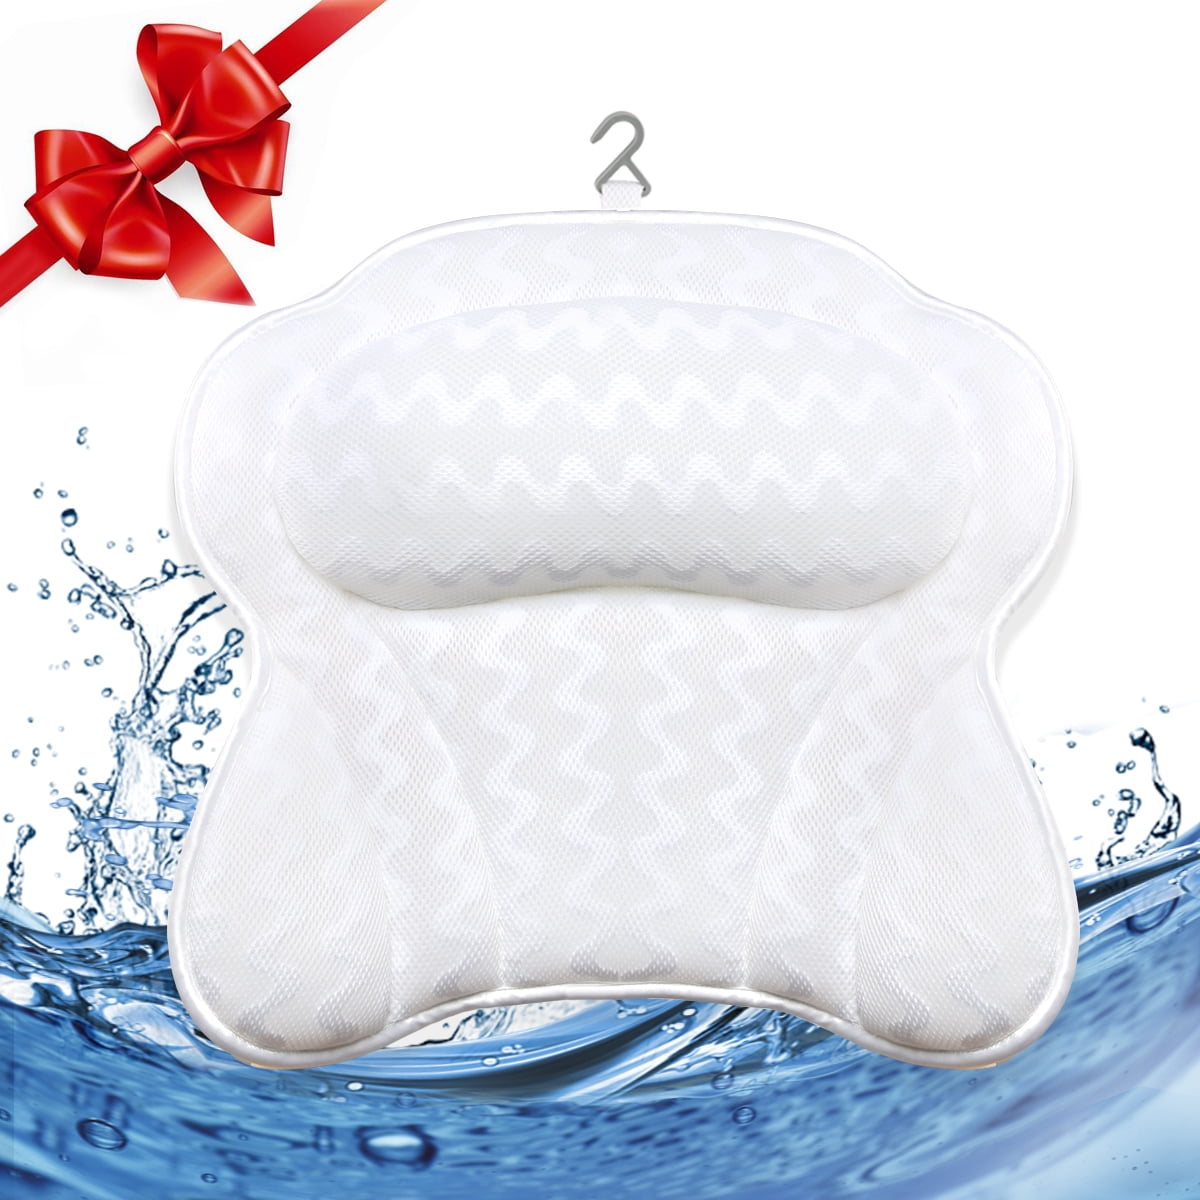 Charmont Luxury Bath Pillow Set, Relaxing Spa Bathtub Headrest for Head and  Neck Support, Slip Resistant Waterproof Bathtub Cushion Strong Suction for